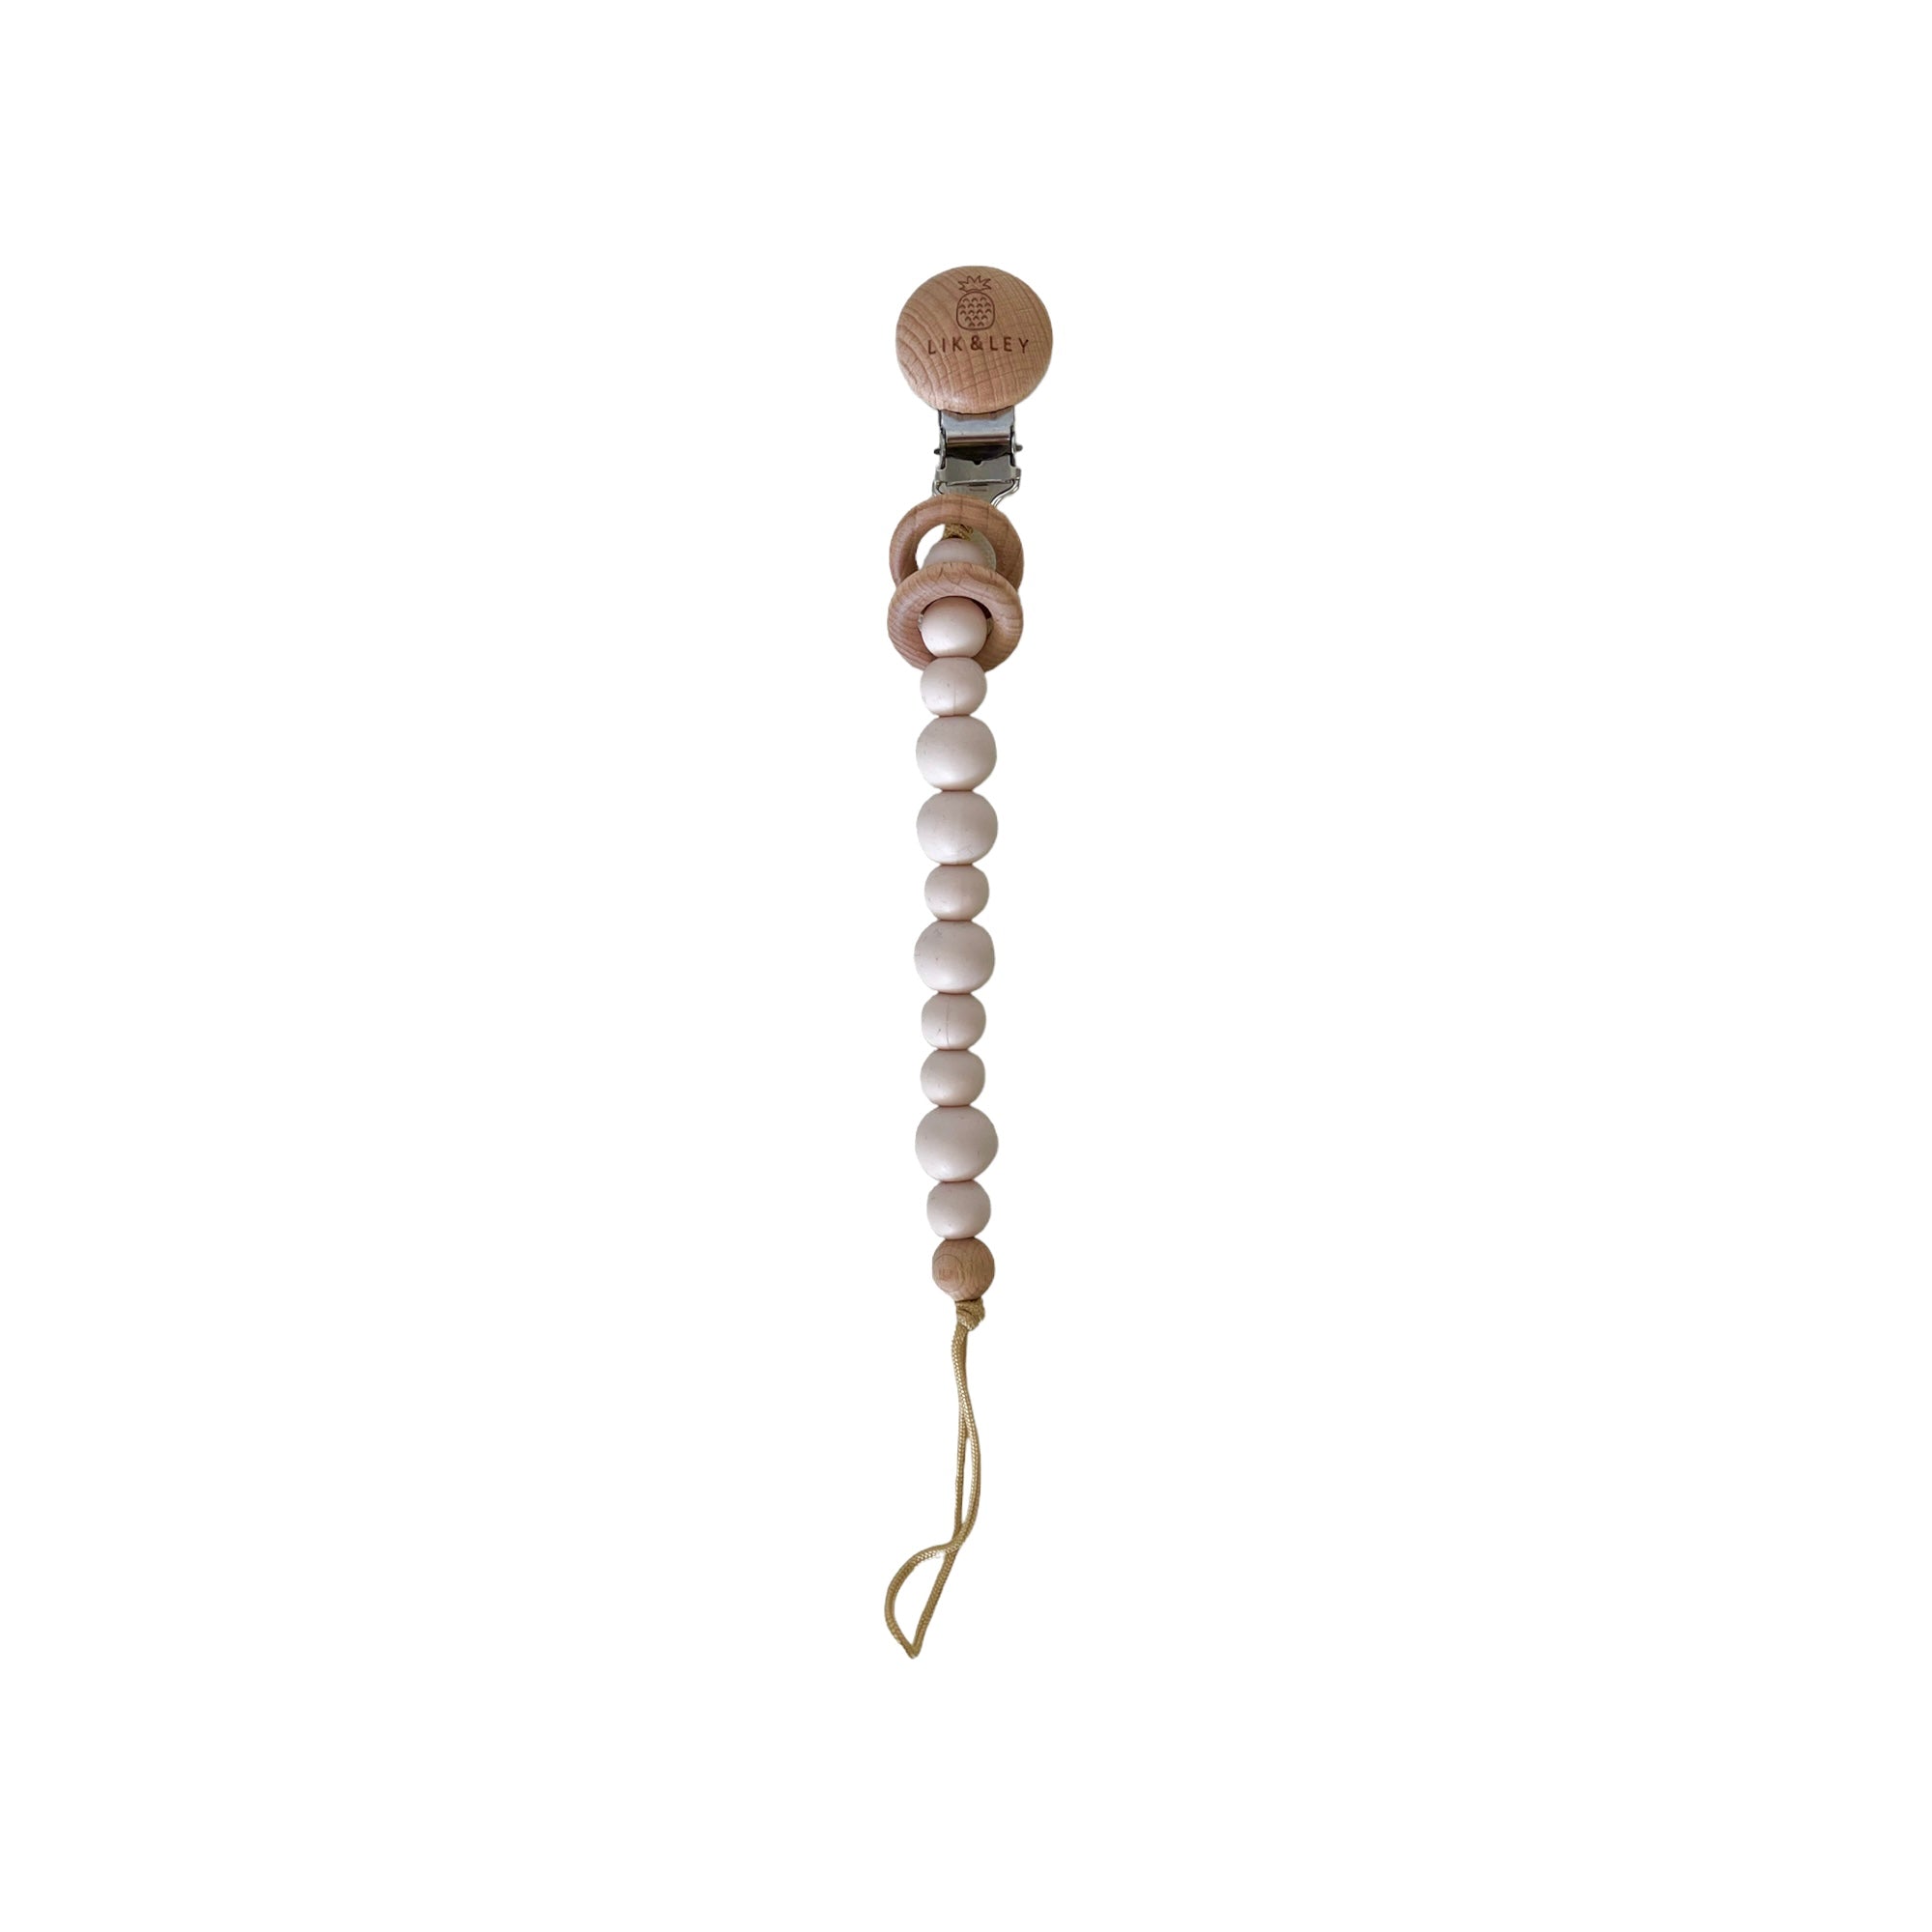 Silicon-Wooden Pacifier Clips